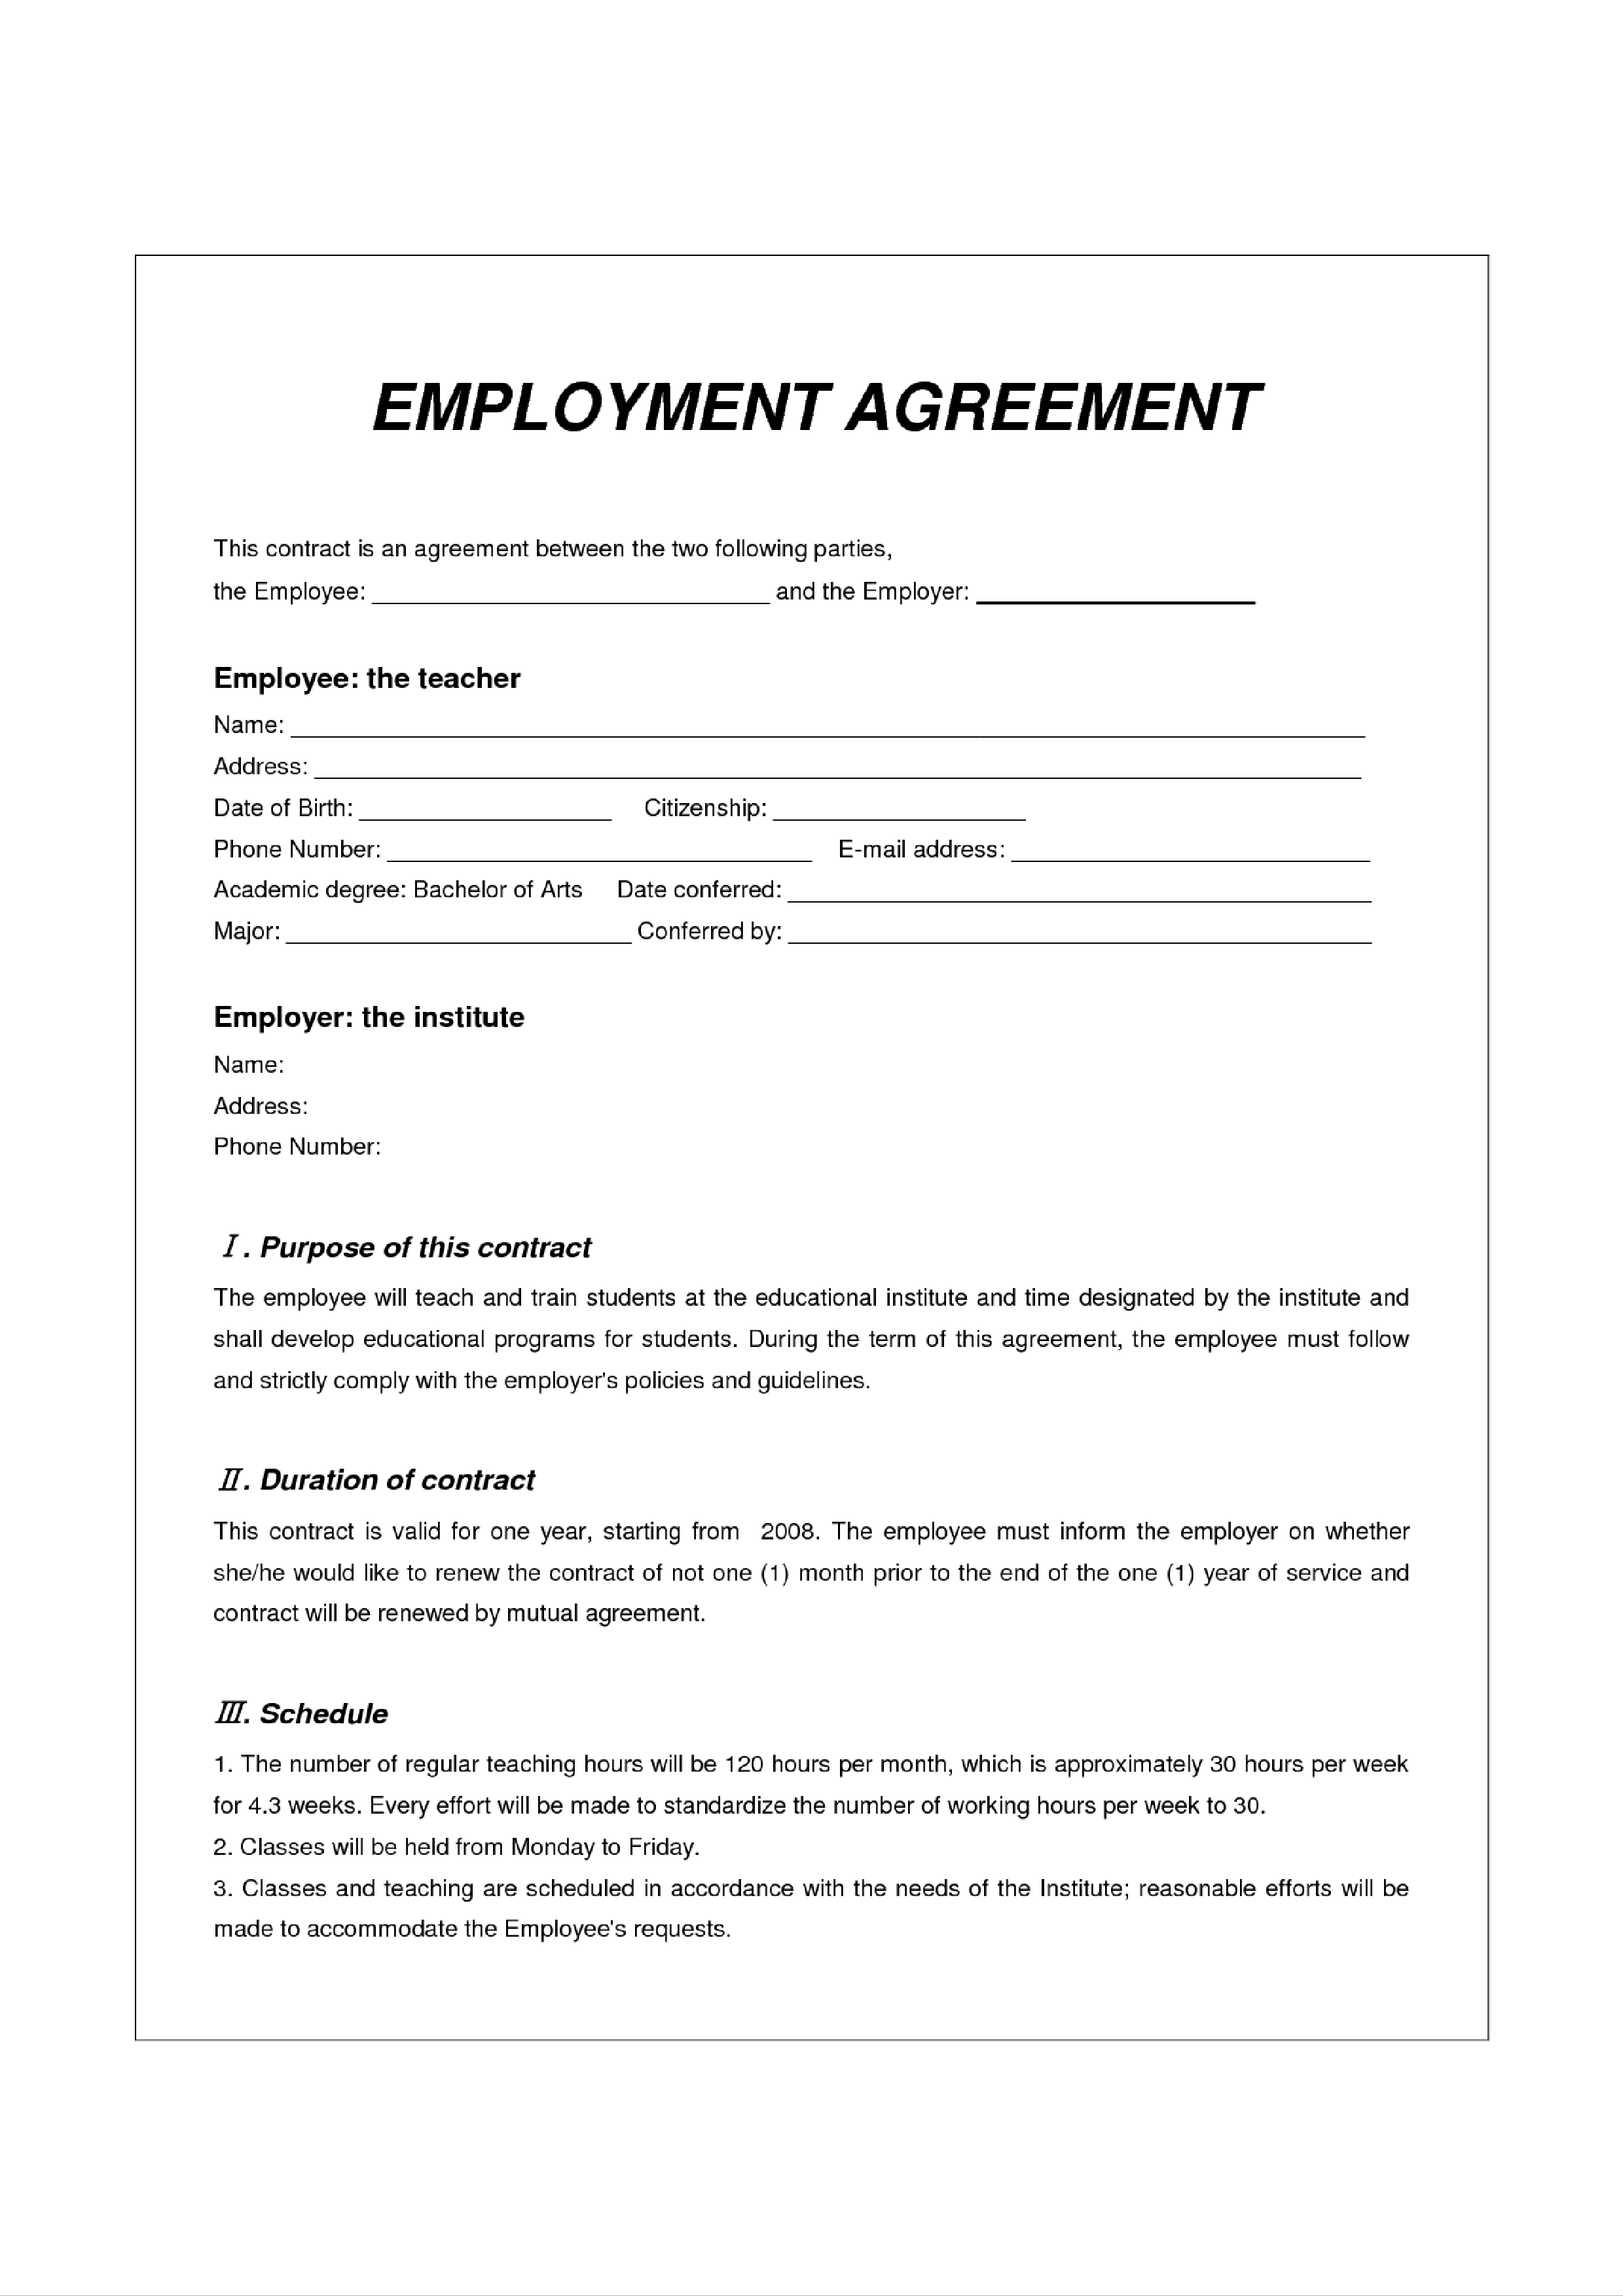 Employment Agreements Cafe main image